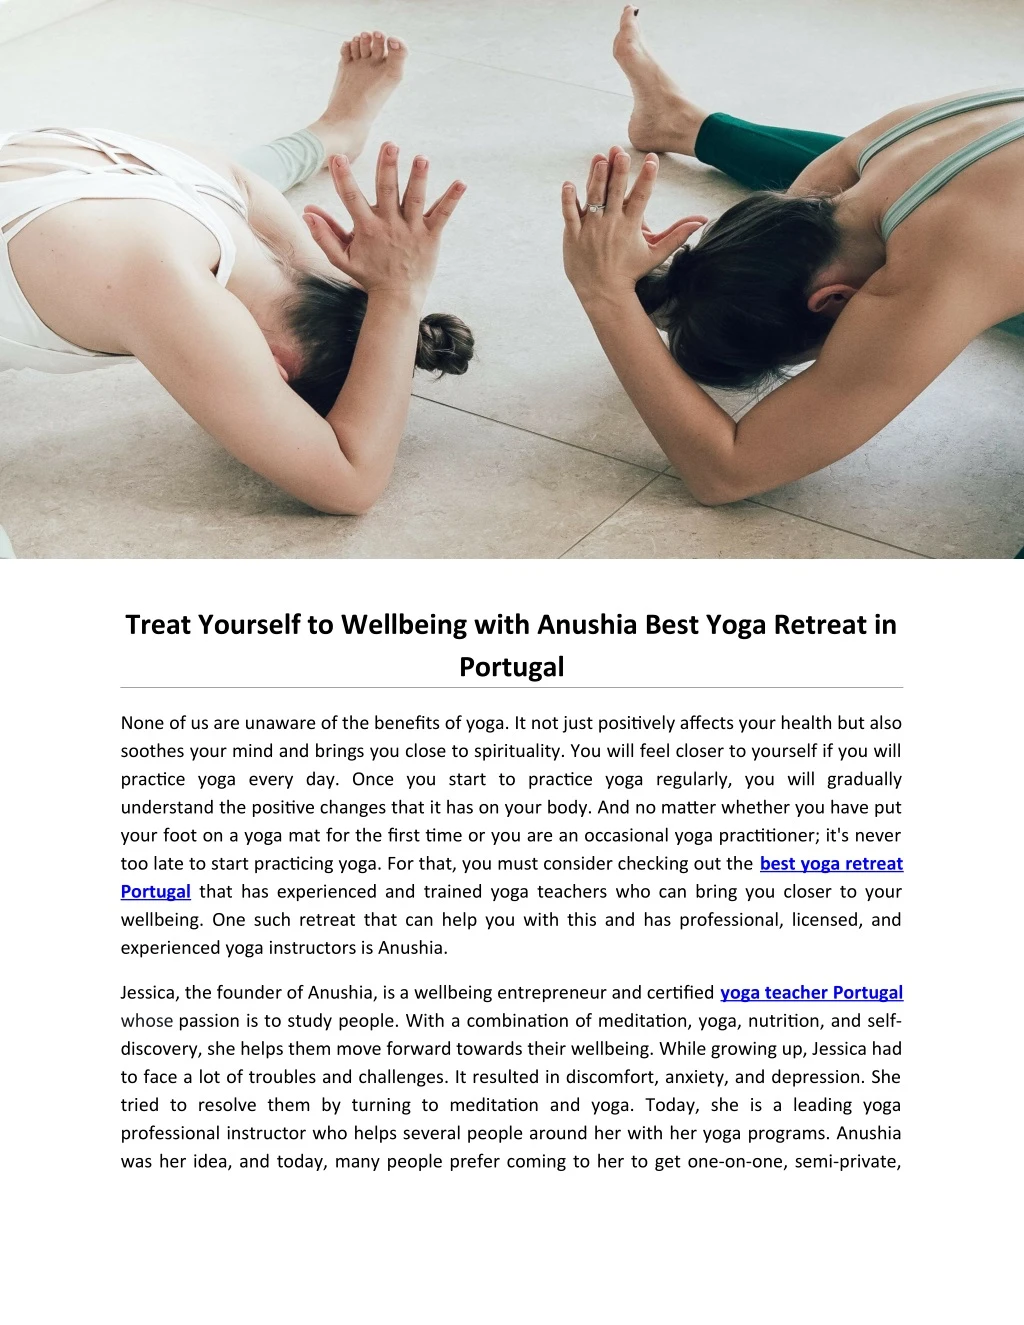 treat yourself to wellbeing with anushia best